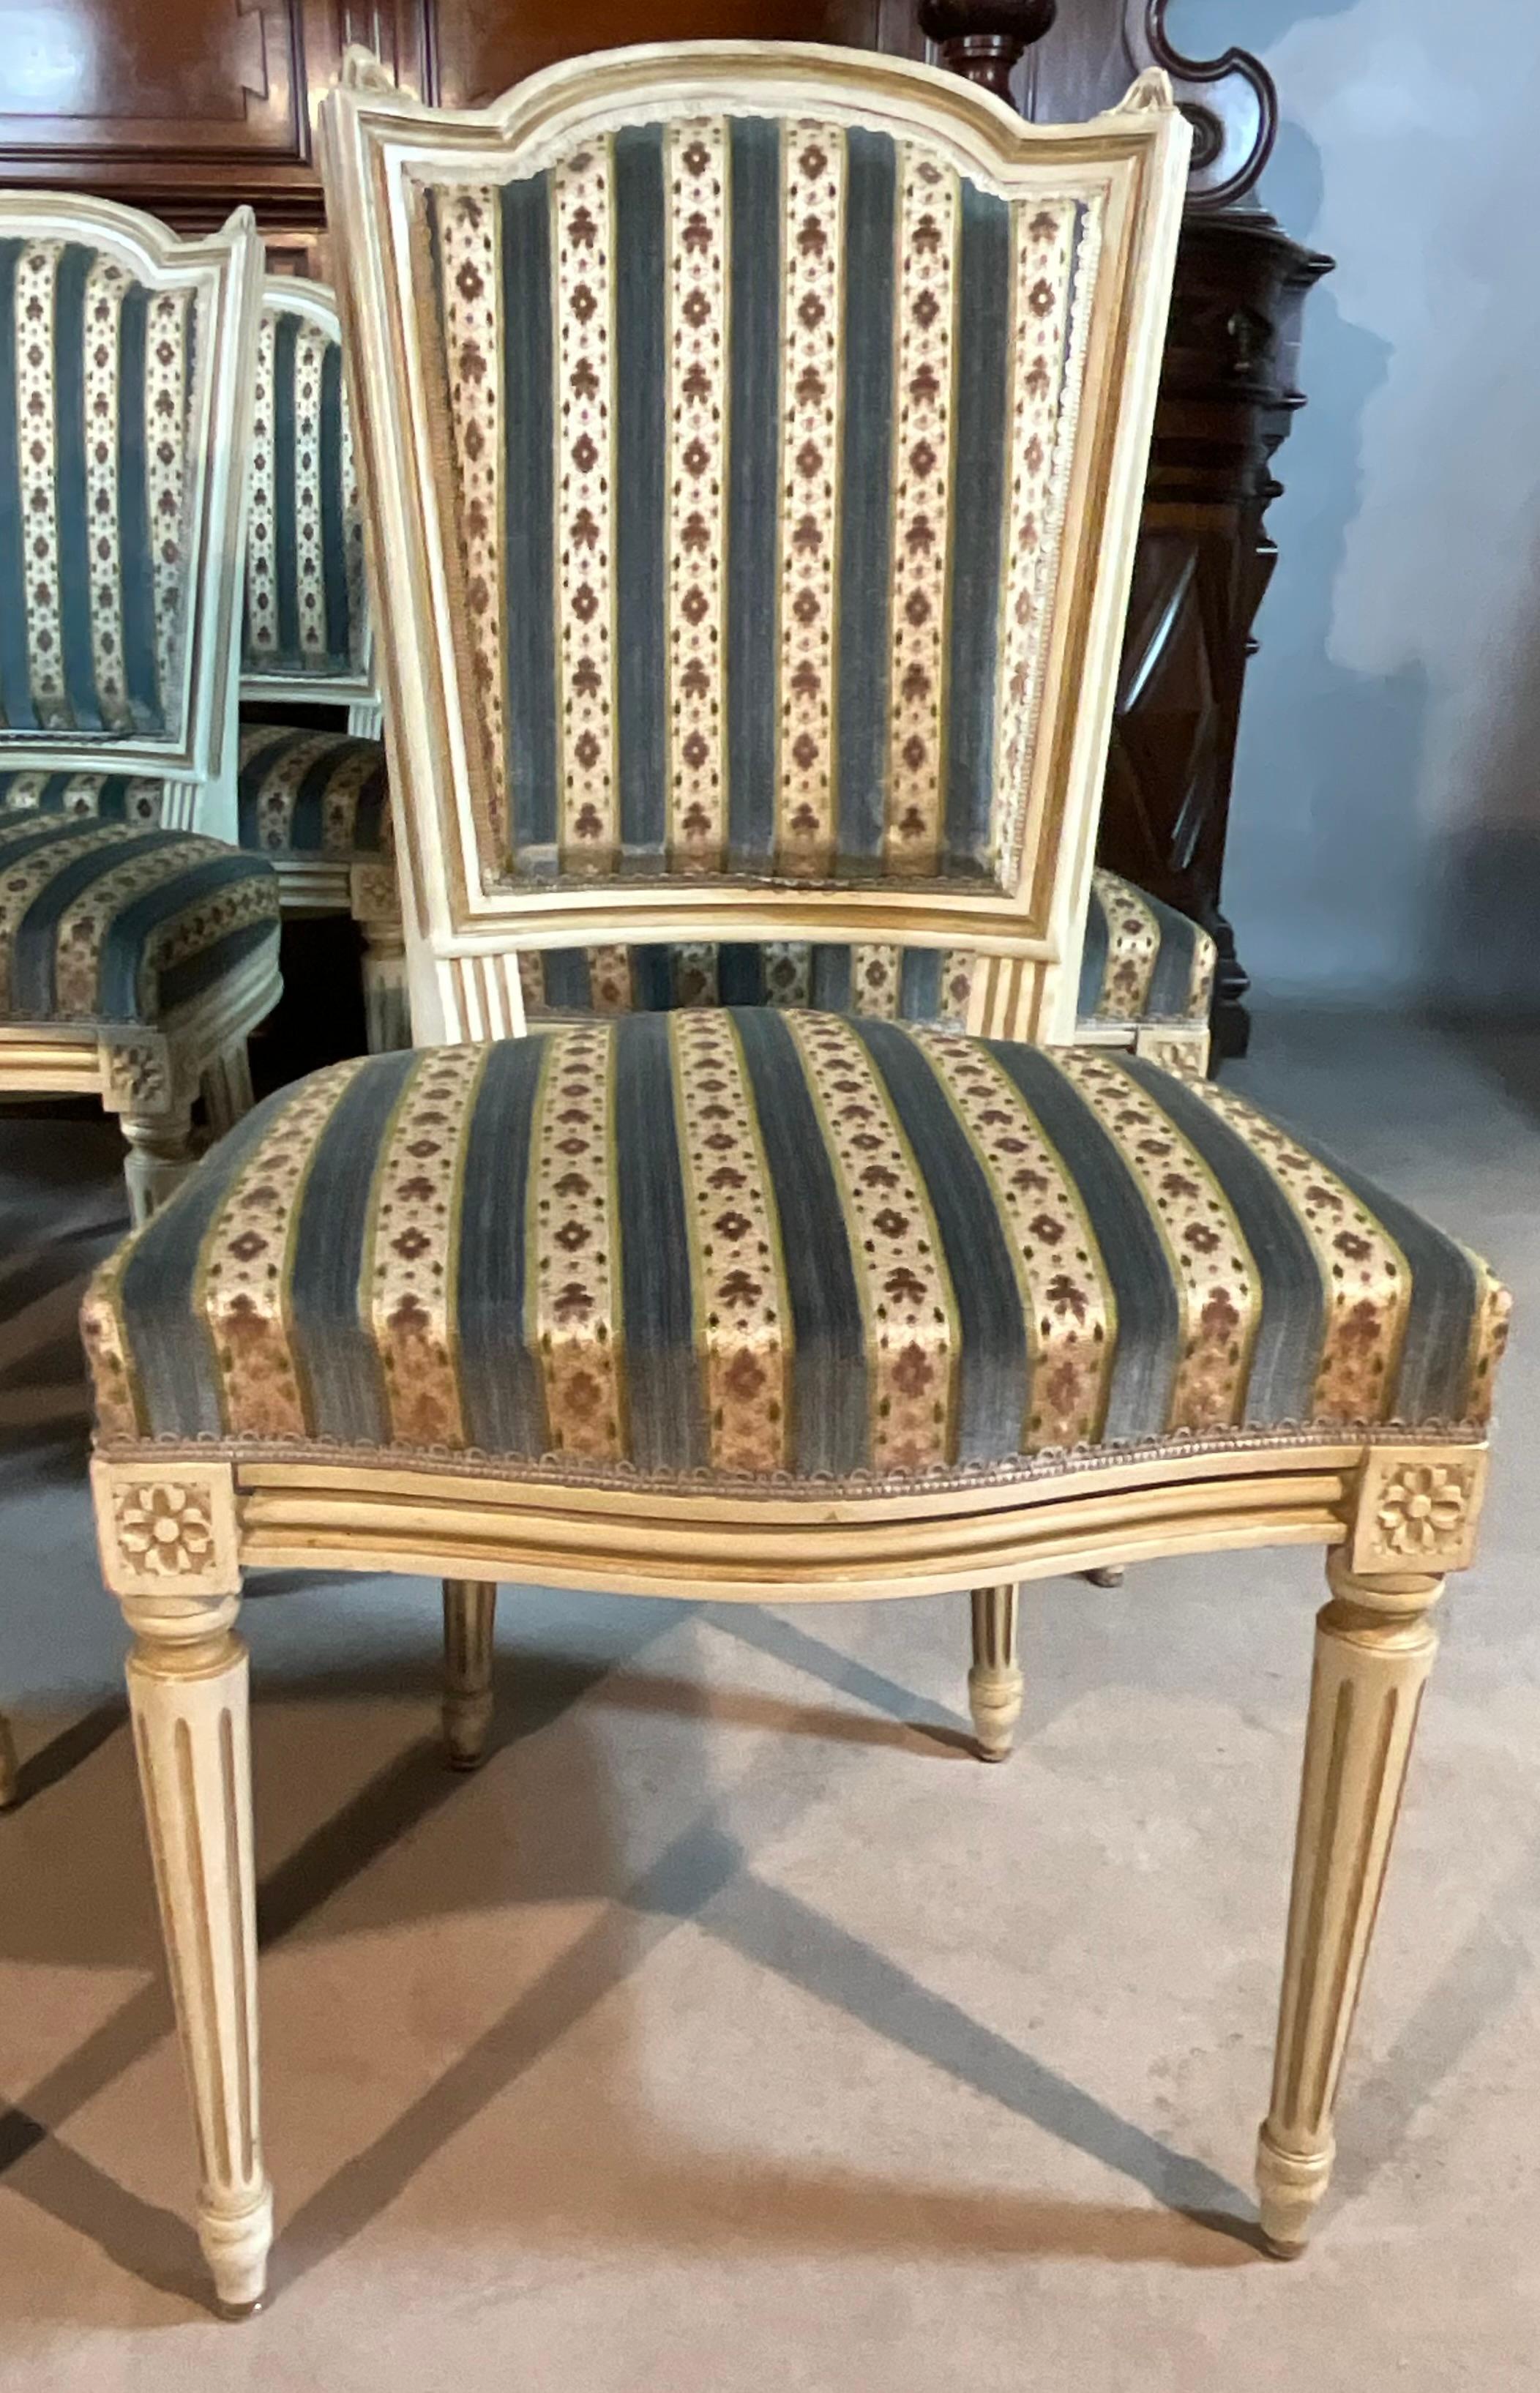 Set Of 6 Chairs And A Louis XVI Armchair Late 19th Century.

The seat is upholstered with fabric. The seat backs are rigid, rectangular and straight. The seat itself is rectangular.

All woodwork is in very good condition and painted. The paint and